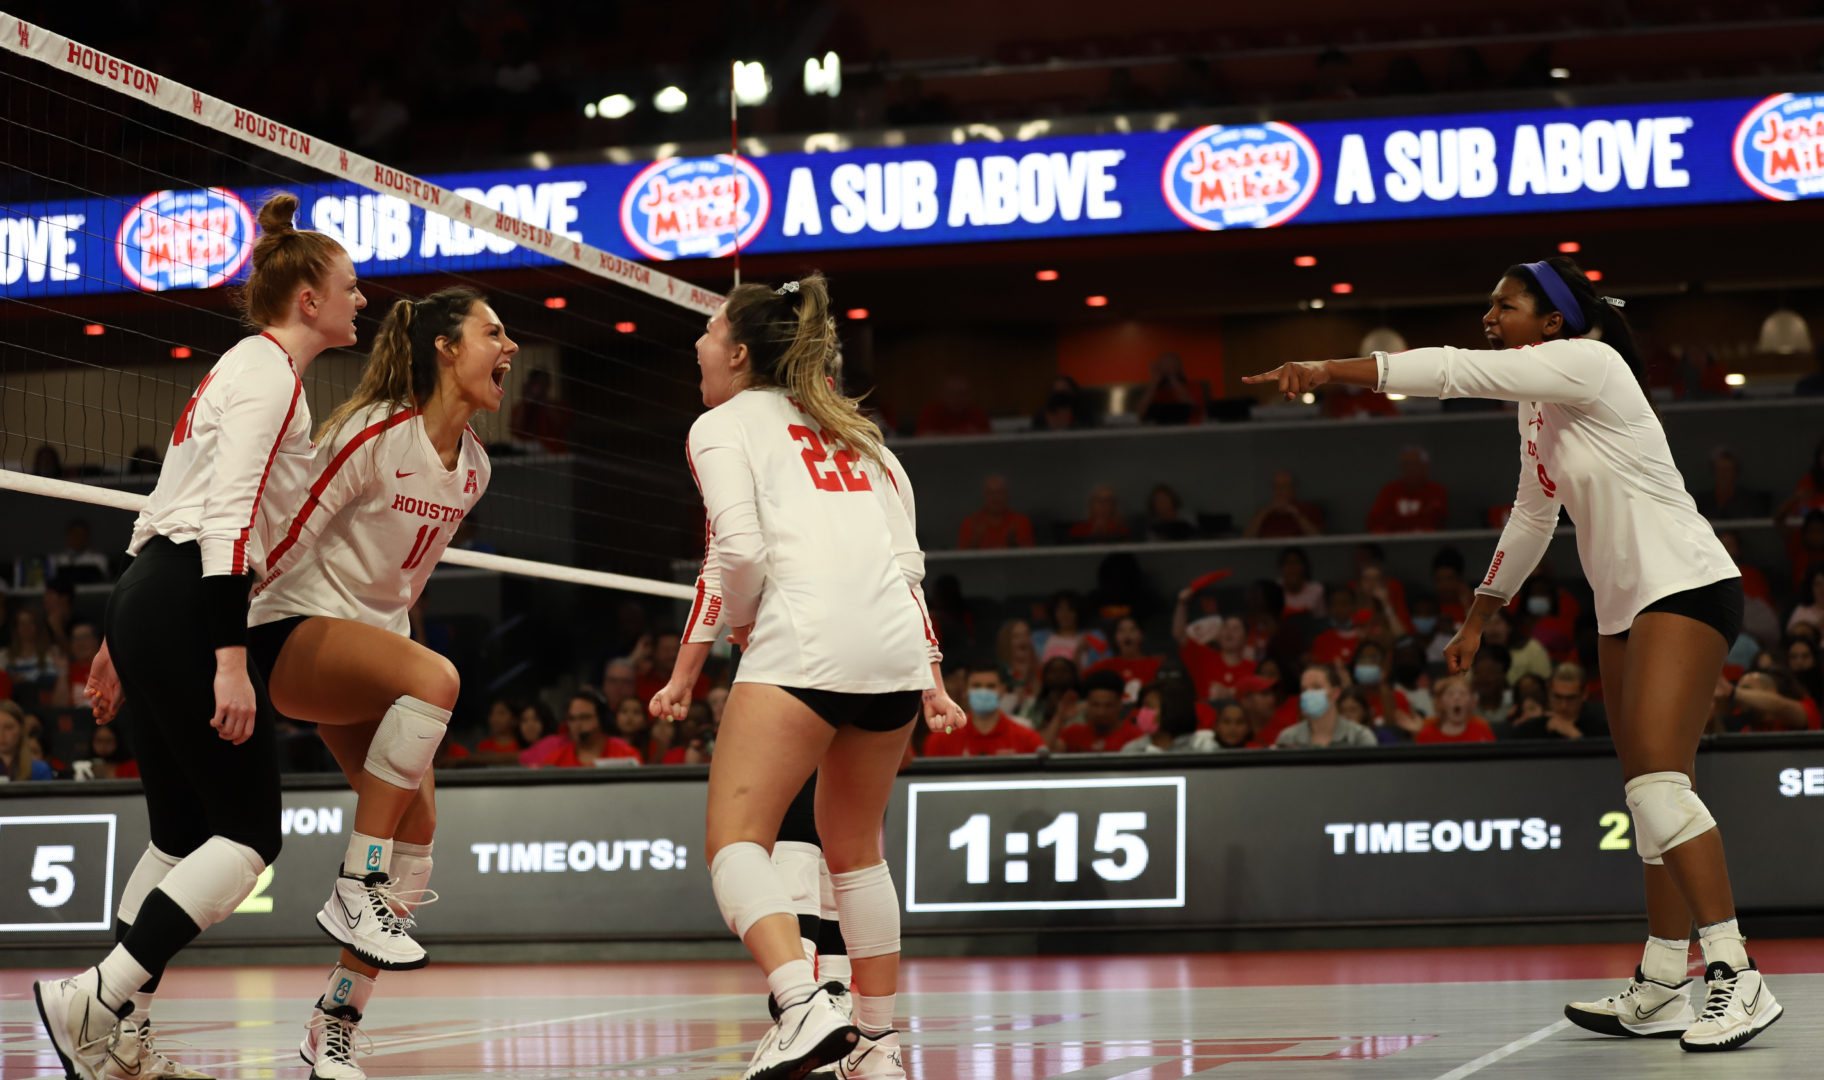 UH volleyball cruised past Memphis, sweeping the Tigers on Sunday afternoon at Fertitta Center. | Esther Umoh/The Cougar